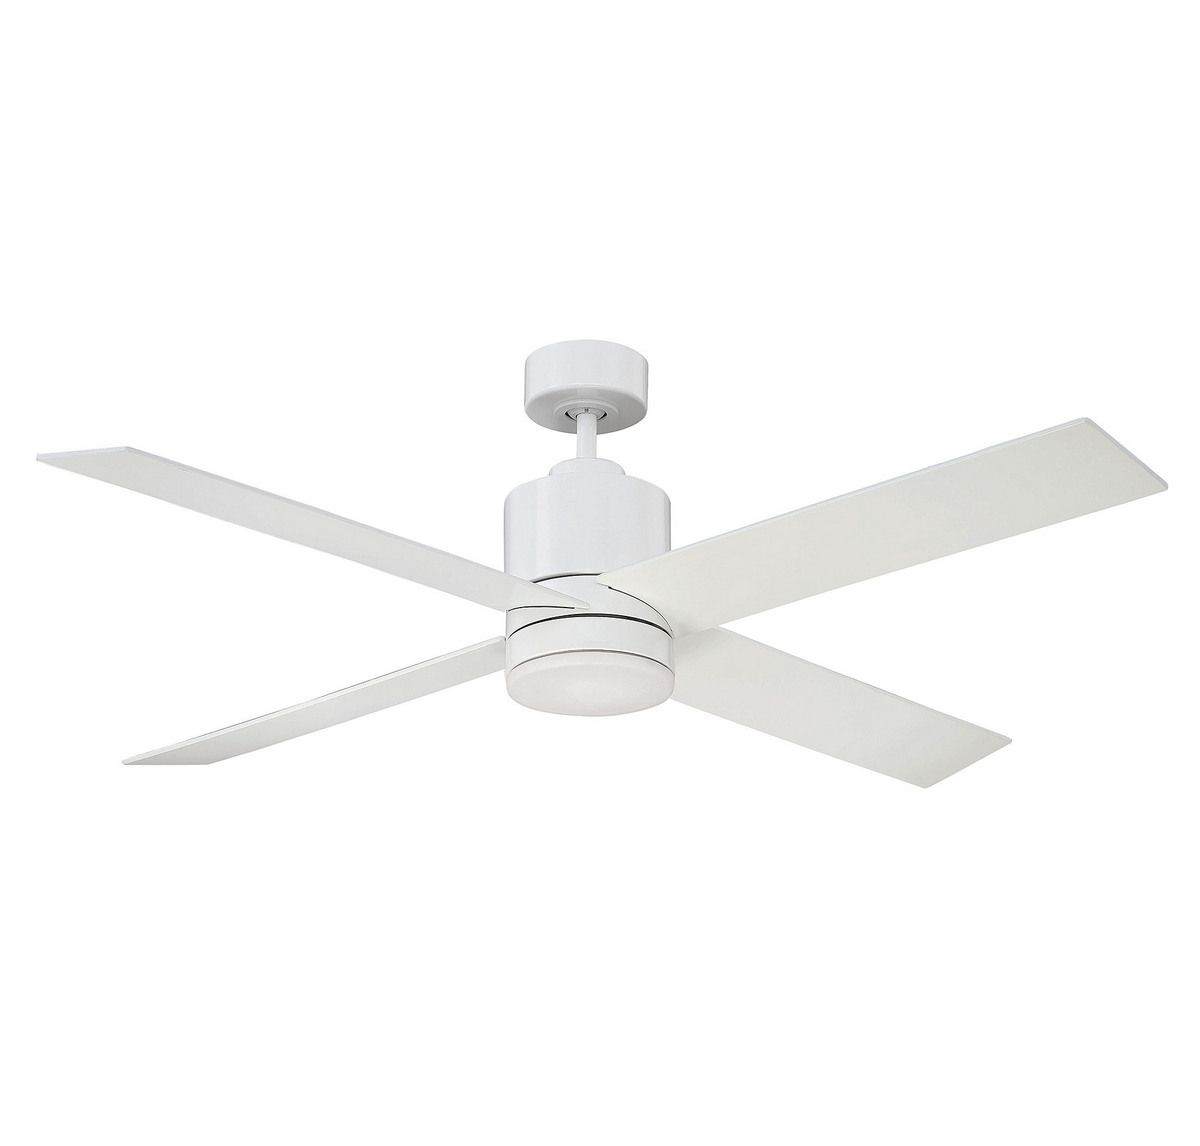 Savoy House Dayton 52 4 Blade Ceiling Fan In White Indoor Ceiling throughout proportions 1200 X 1146